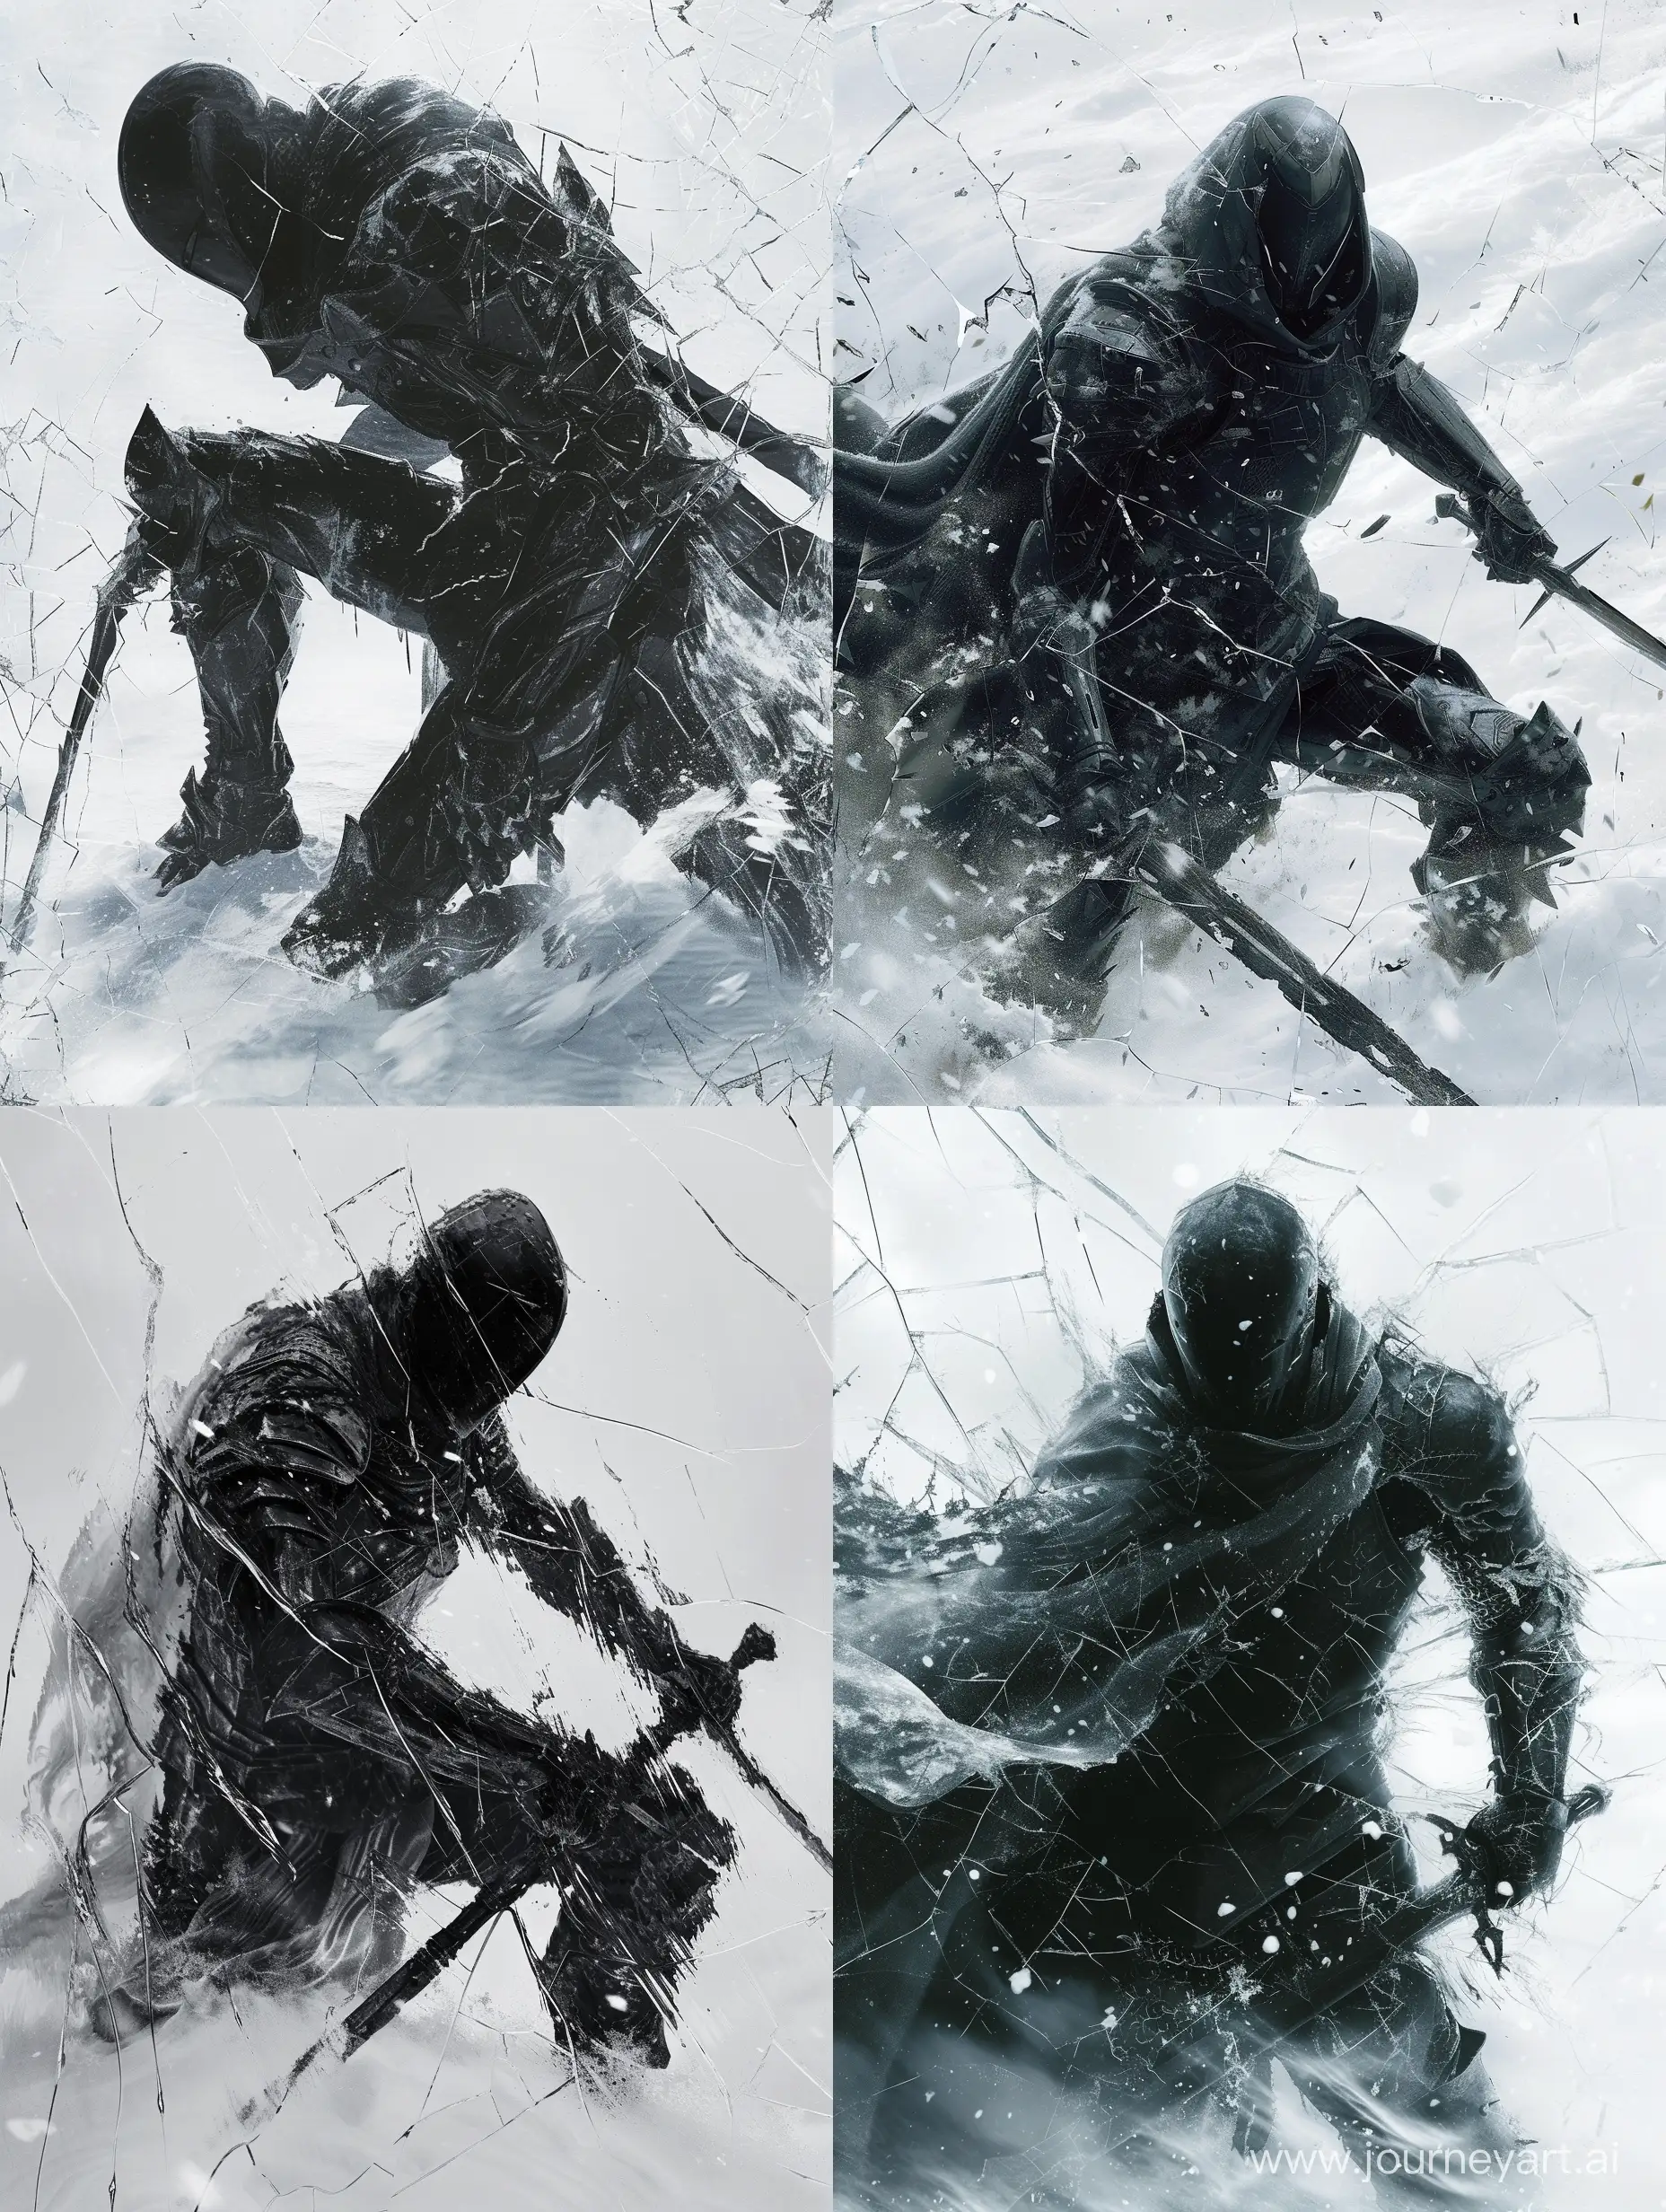 music album cover, clear art, black sci fi knight assassin, brutal pose. in the snow, cracked, darksouls style